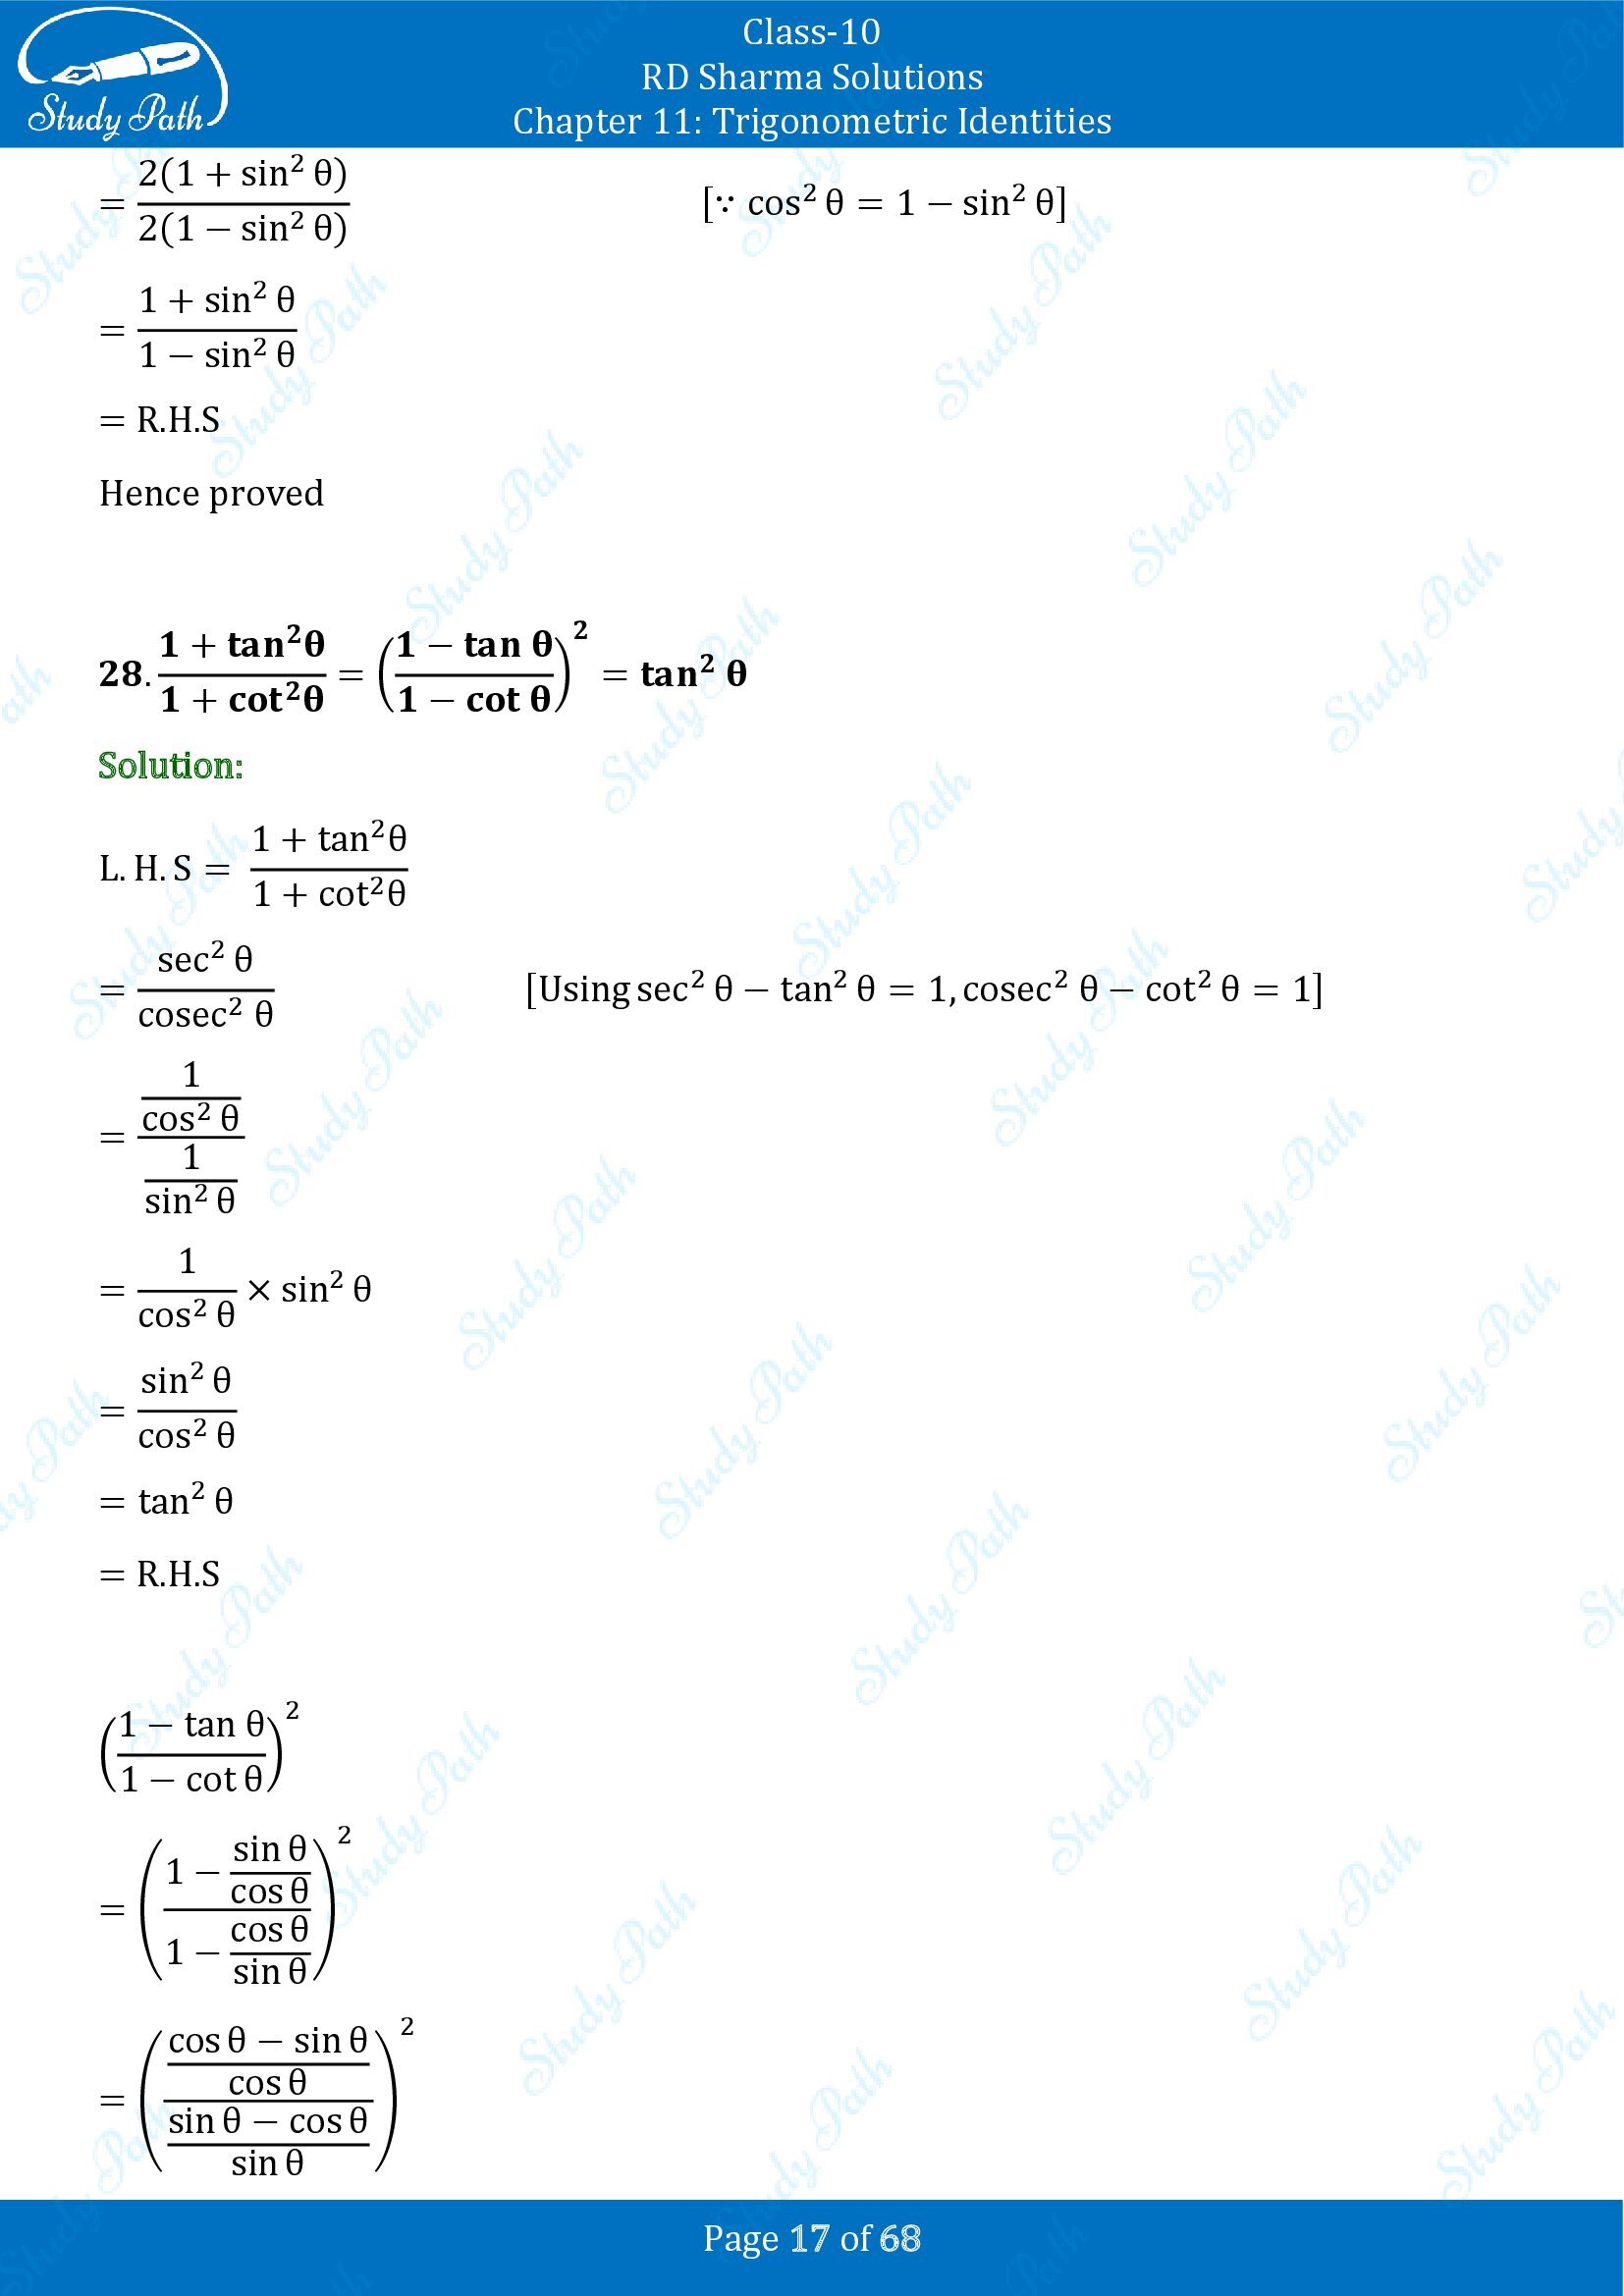 RD Sharma Solutions Class 10 Chapter 11 Trigonometric Identities Exercise 11.1 00017